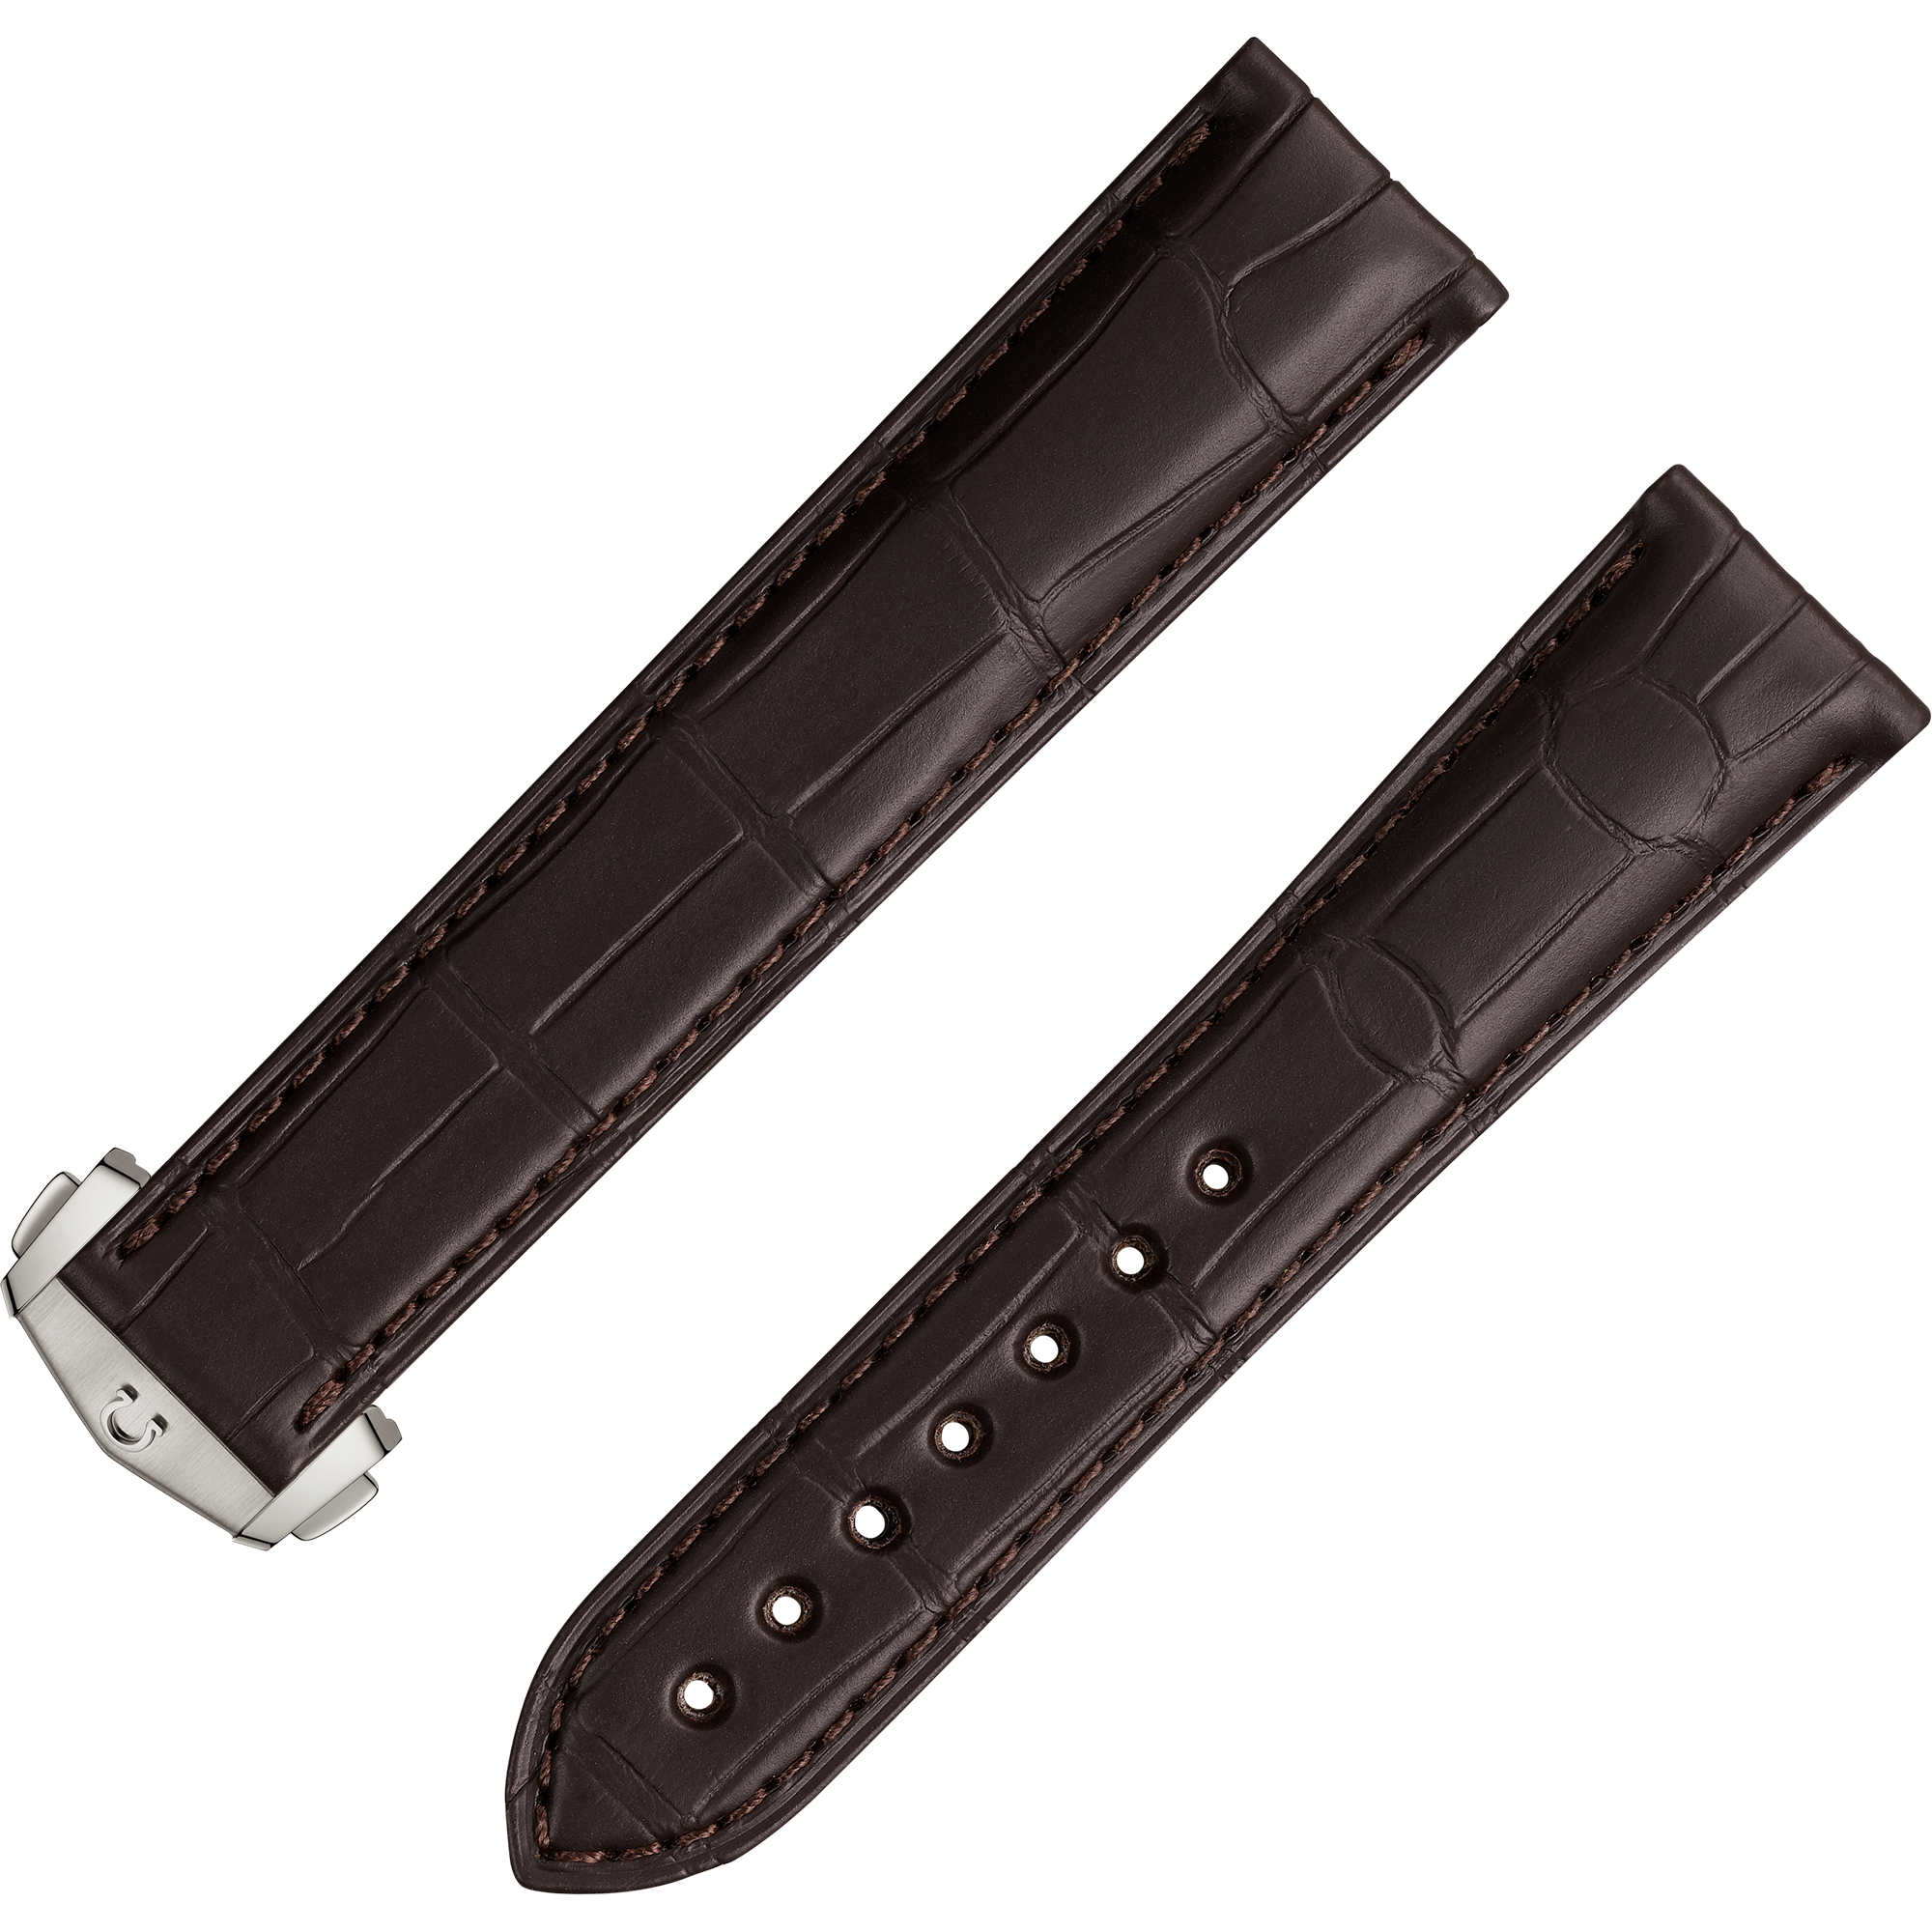 Two-piece strap - Brown alligator leather strap with foldover clasp - 98000275W